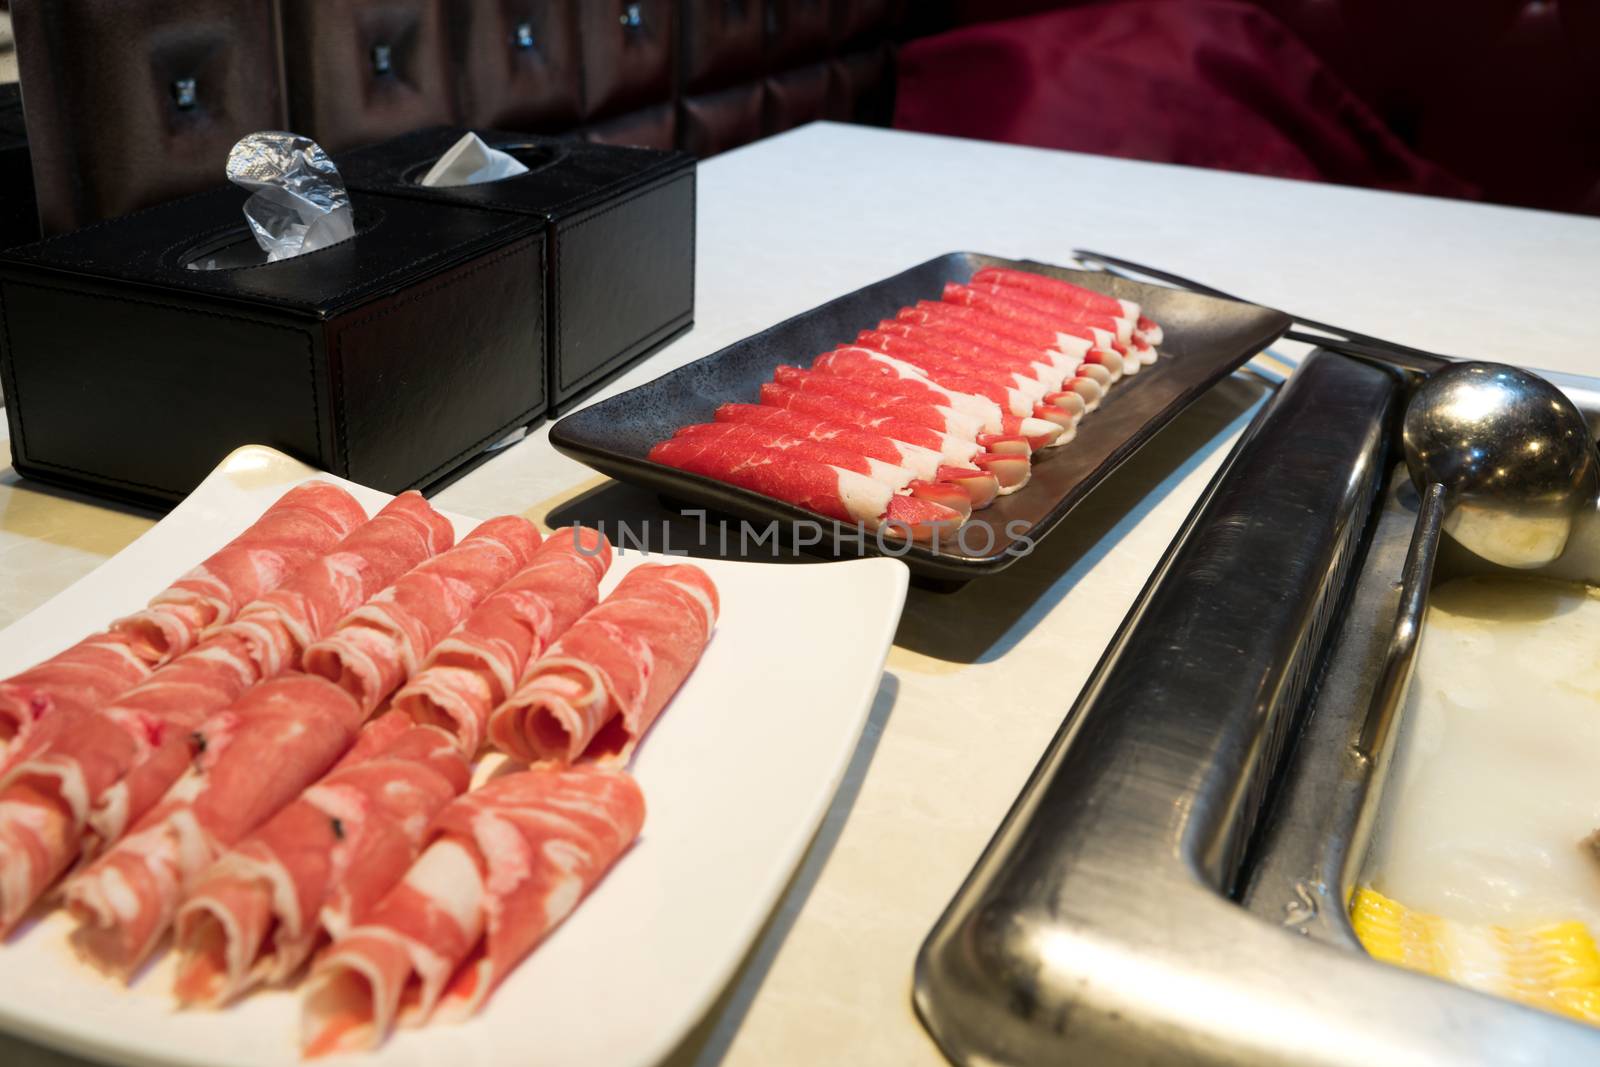 the meat and lamp slide for Chinese shabu style, yummy by psodaz